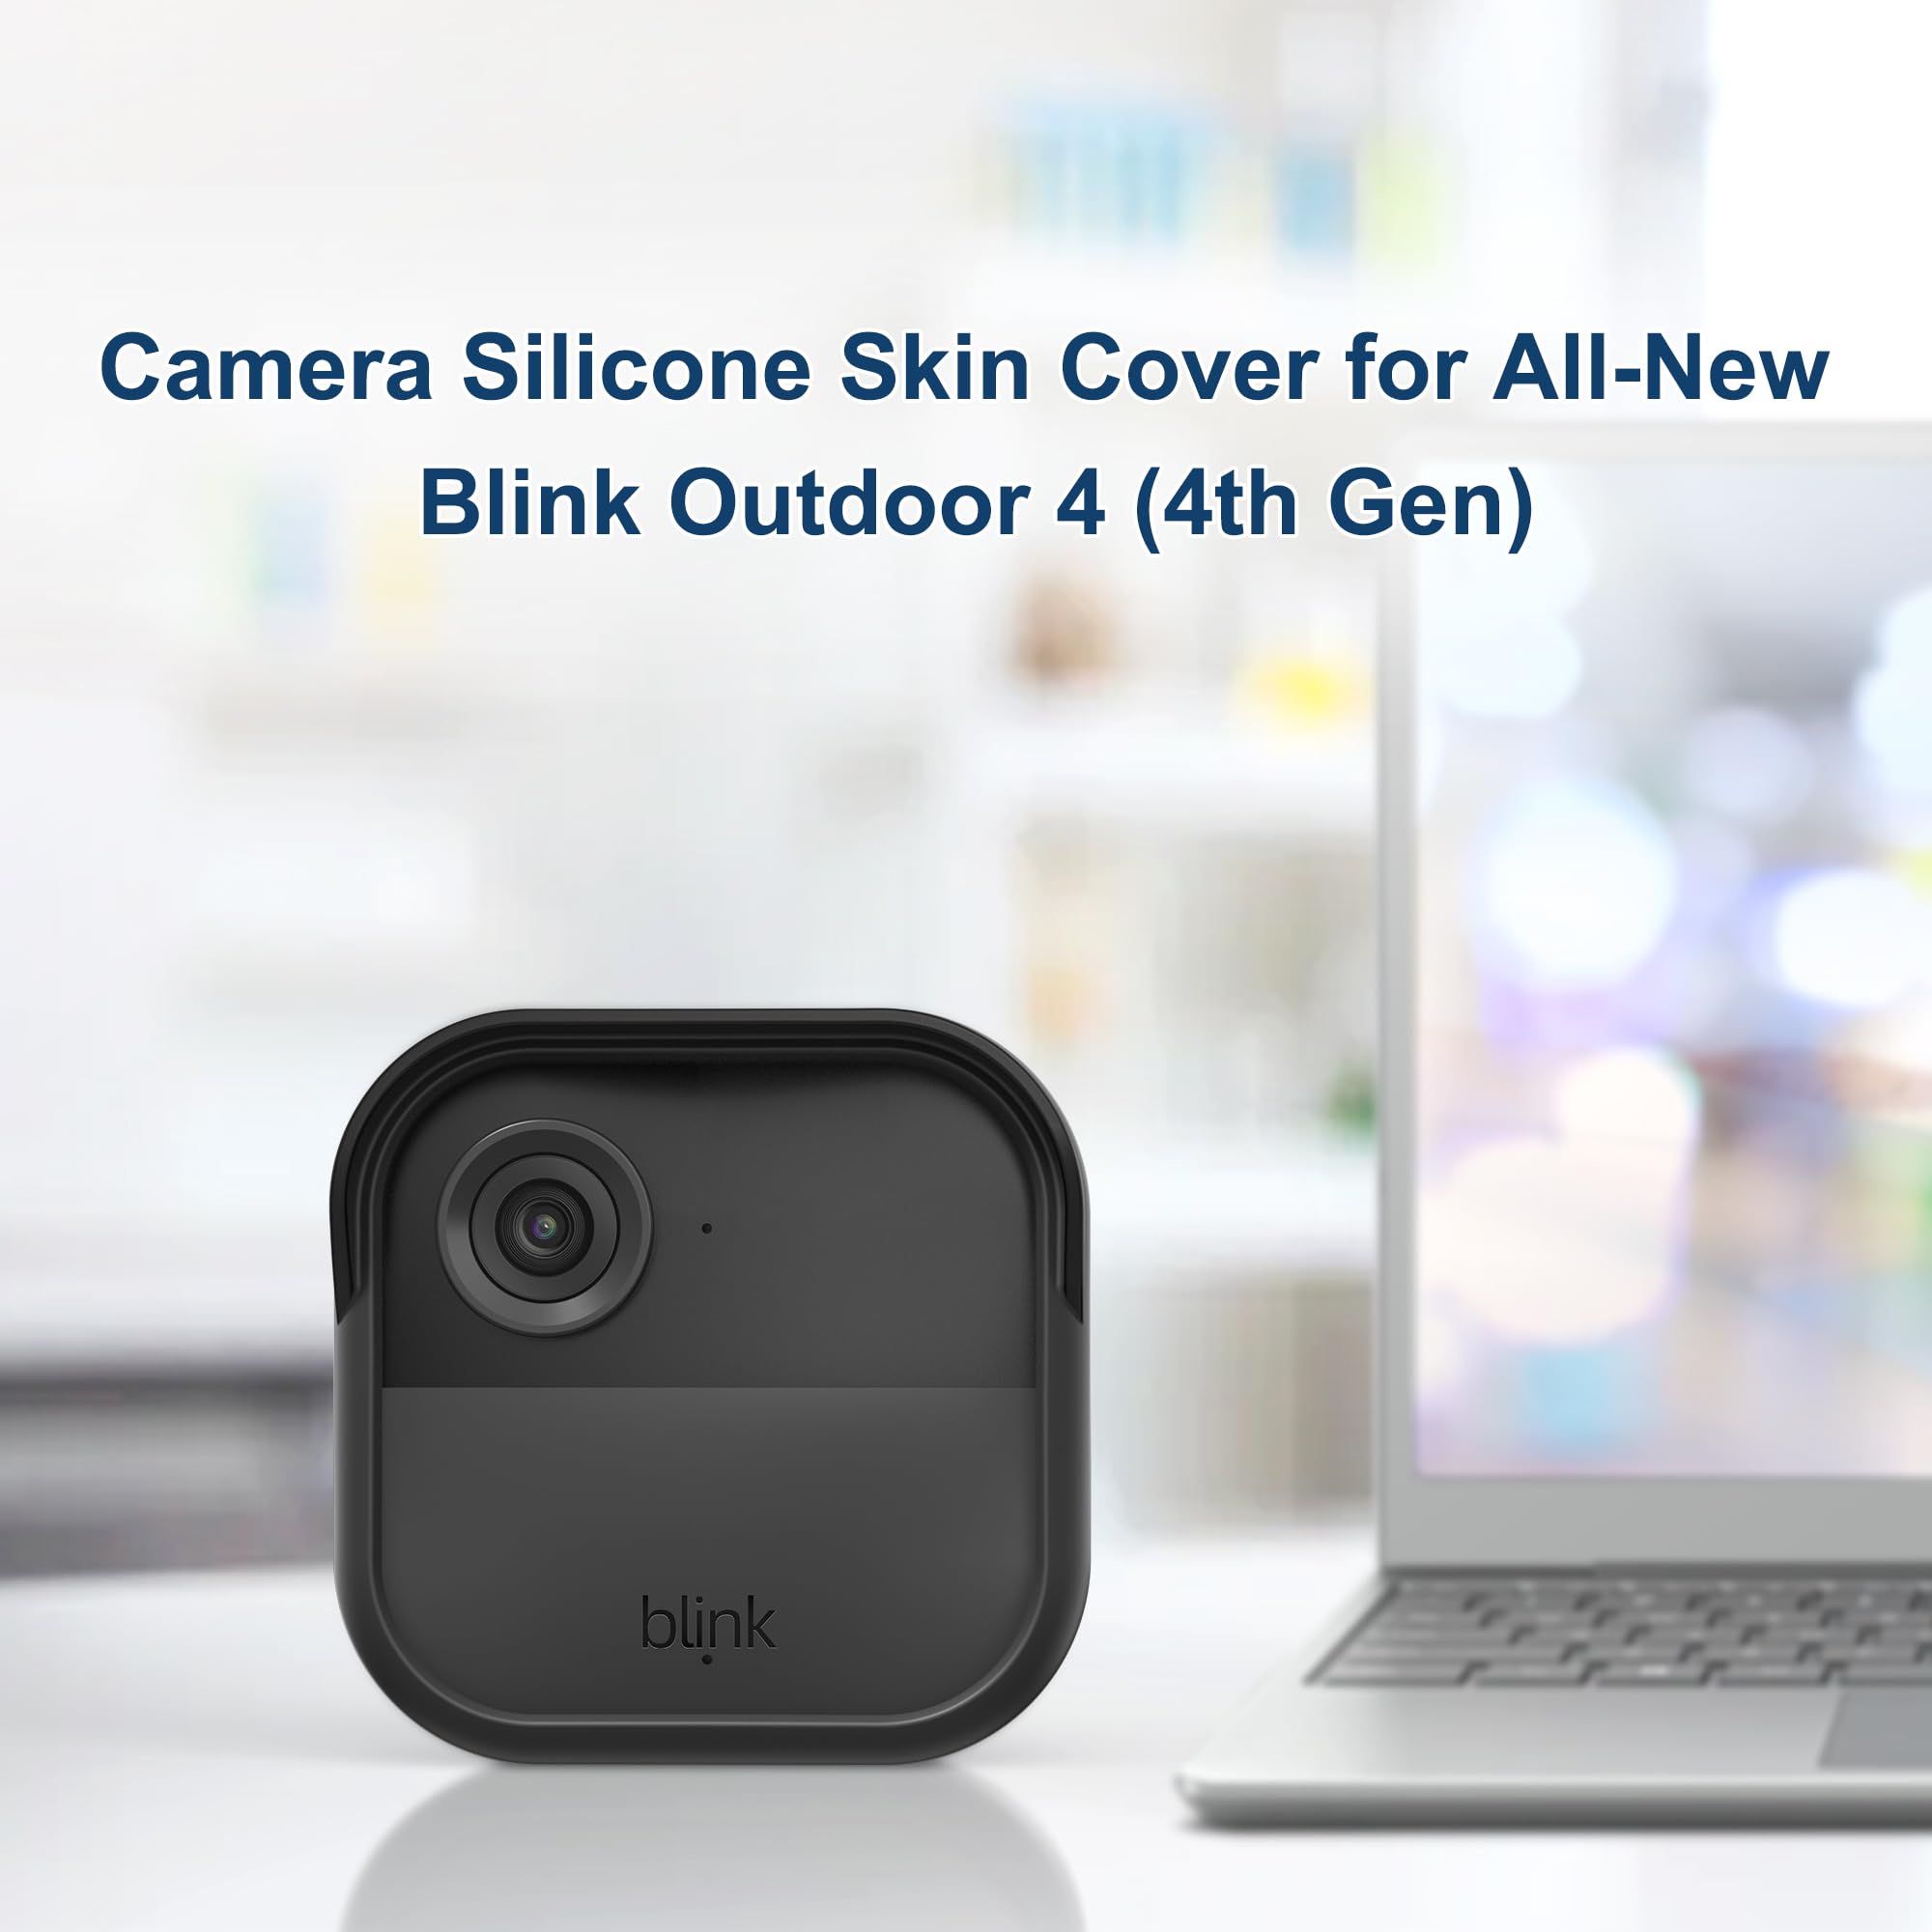 Camera Silicone Skin Cover for All-New Blink Outdoor 4 (4th Gen), COOLWUFAN Anti-Scratch Silicone Case Provides Full Camera Protection, Camera Accessories for Blink, Black (3 Packs)